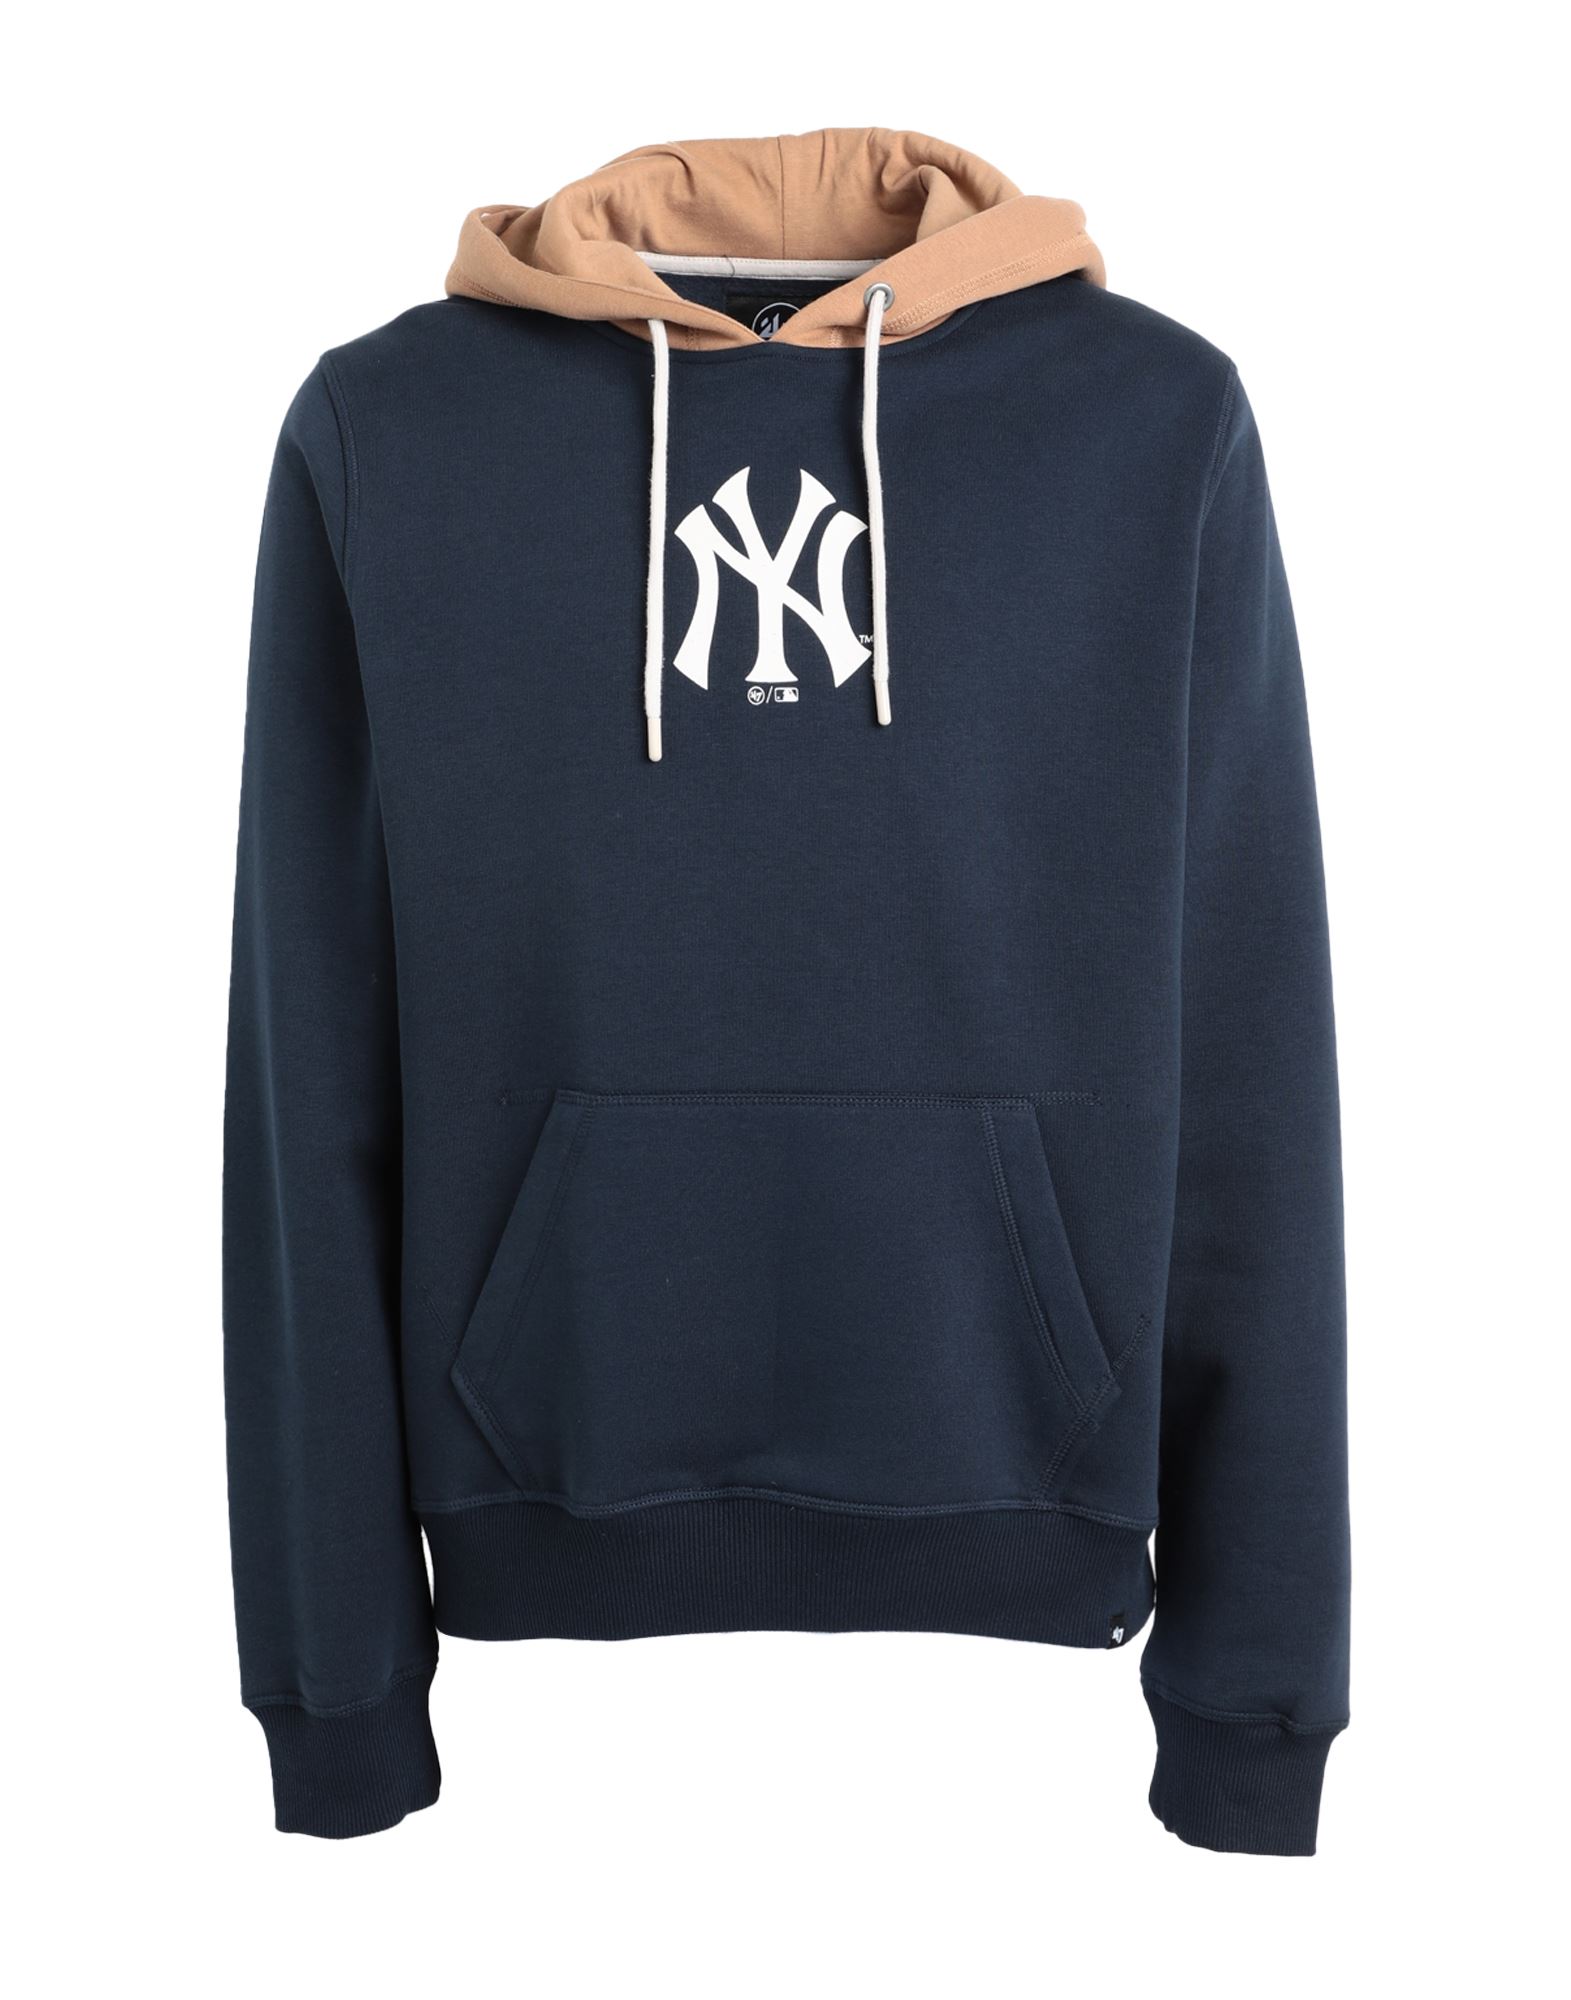 Product Detail  '47 PINSTRIPE DOUBLE HEADER SHORTSTOP PULLOVER HOOD -  White - S